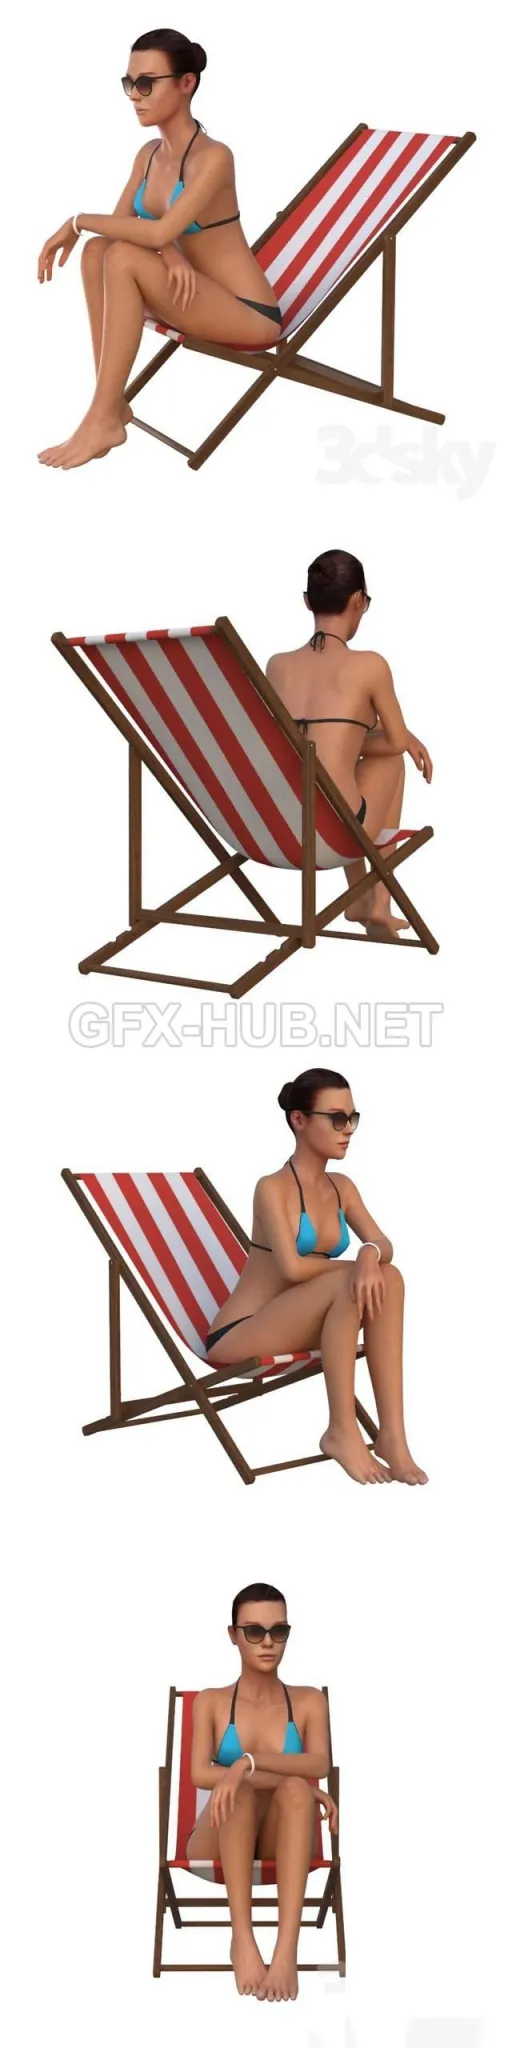 The girl in the beach chair – 227069